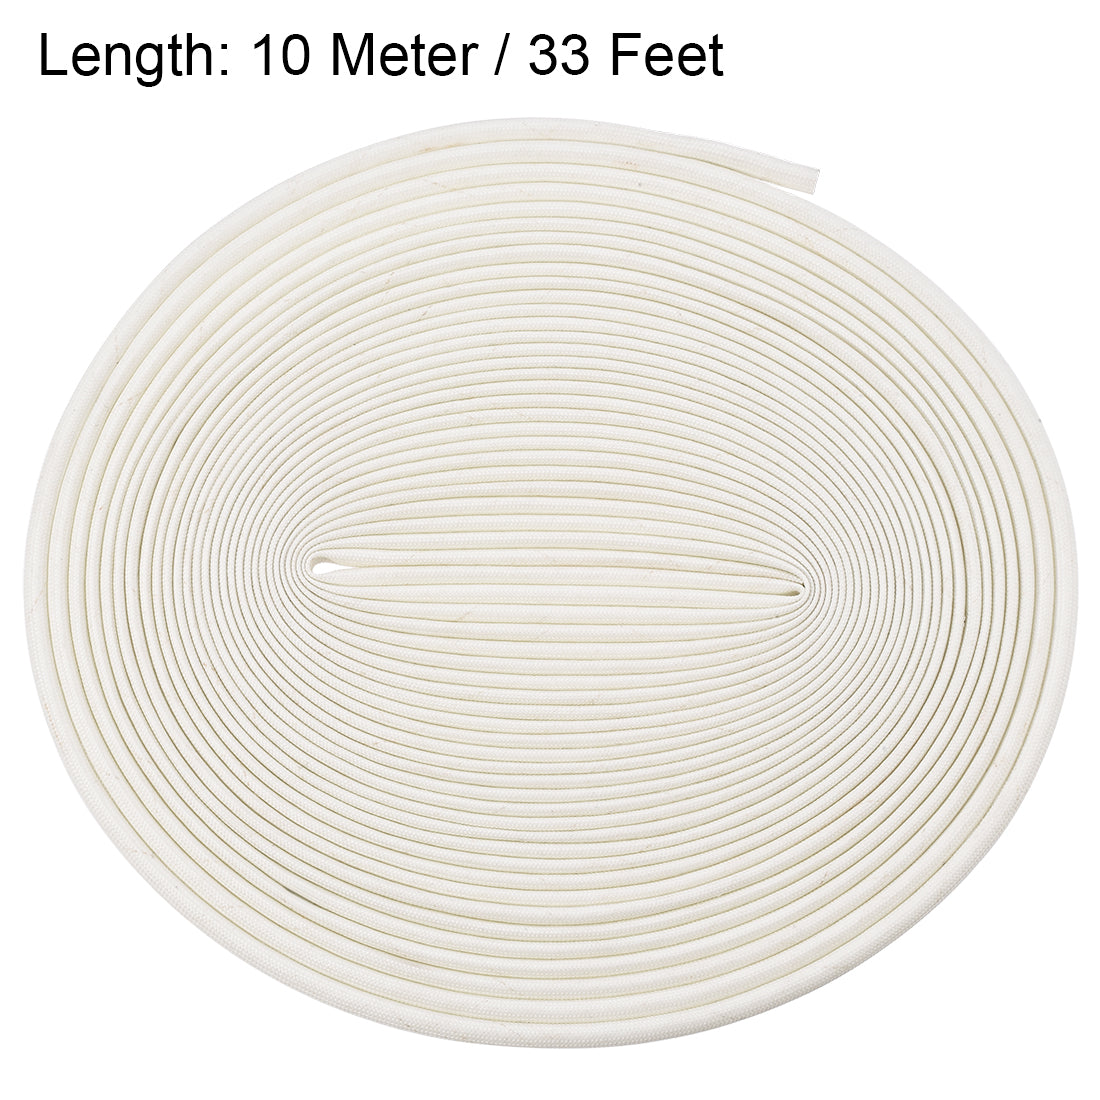 uxcell Uxcell Insulation Cable Protector, 33Ft-4mm High TEMP Silicone Fiberglass Sleeve White